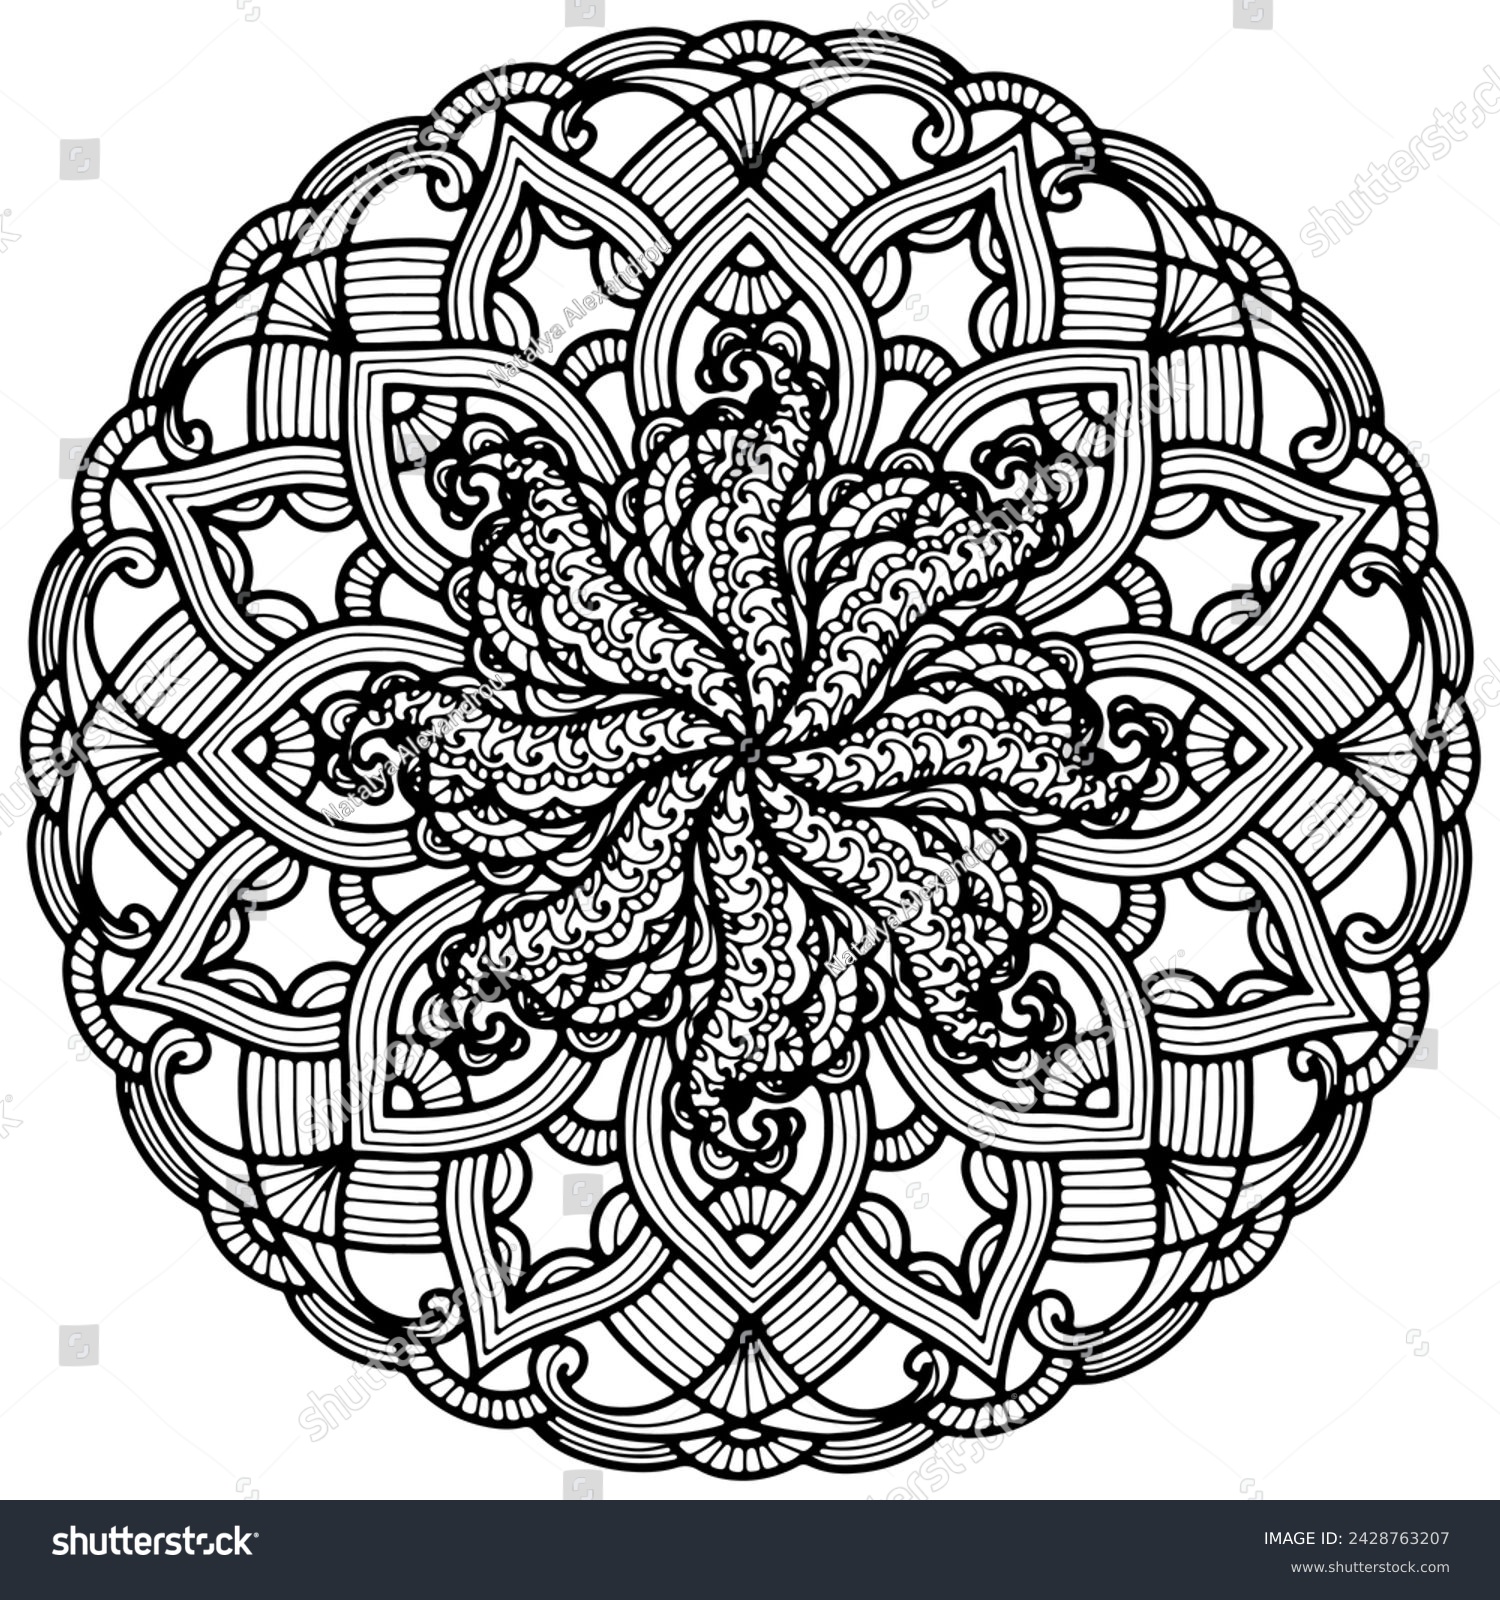 SVG of Coloring page 363, hand drawn, vector. Mandala 306, ethnic, swirl pattern, object isolated on white background. svg